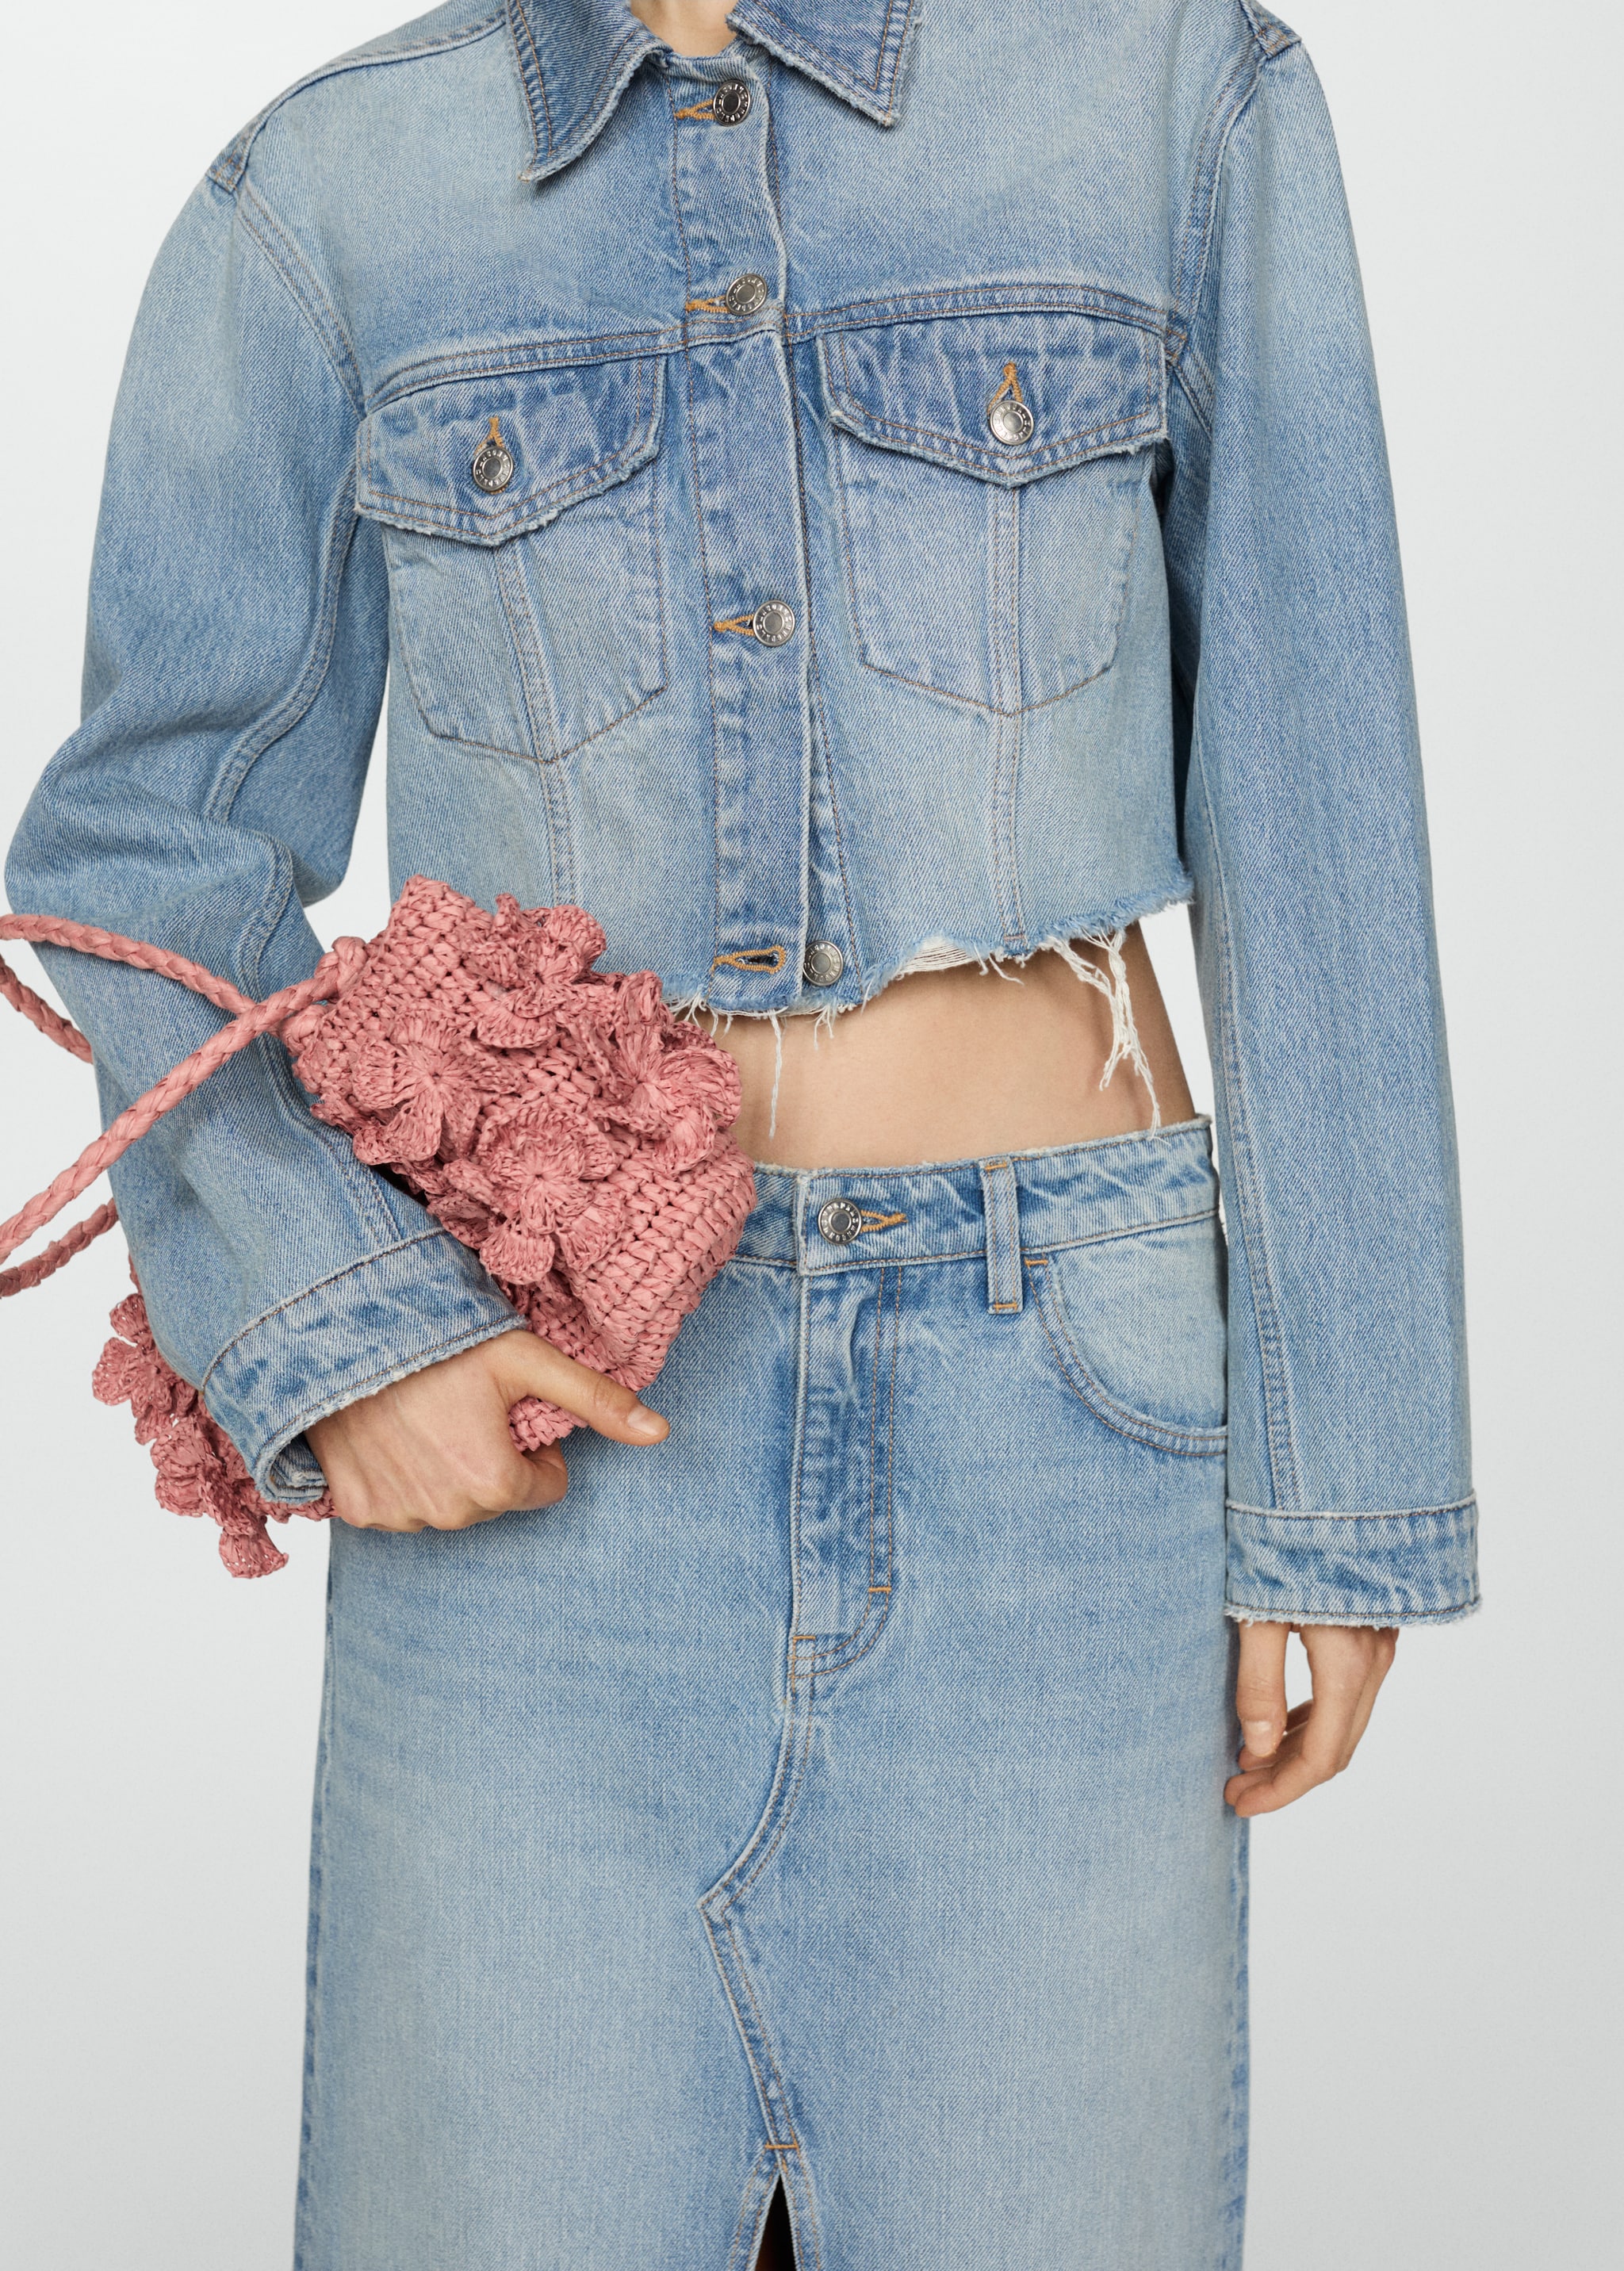 Denim skirt with frayed hem - Details of the article 6